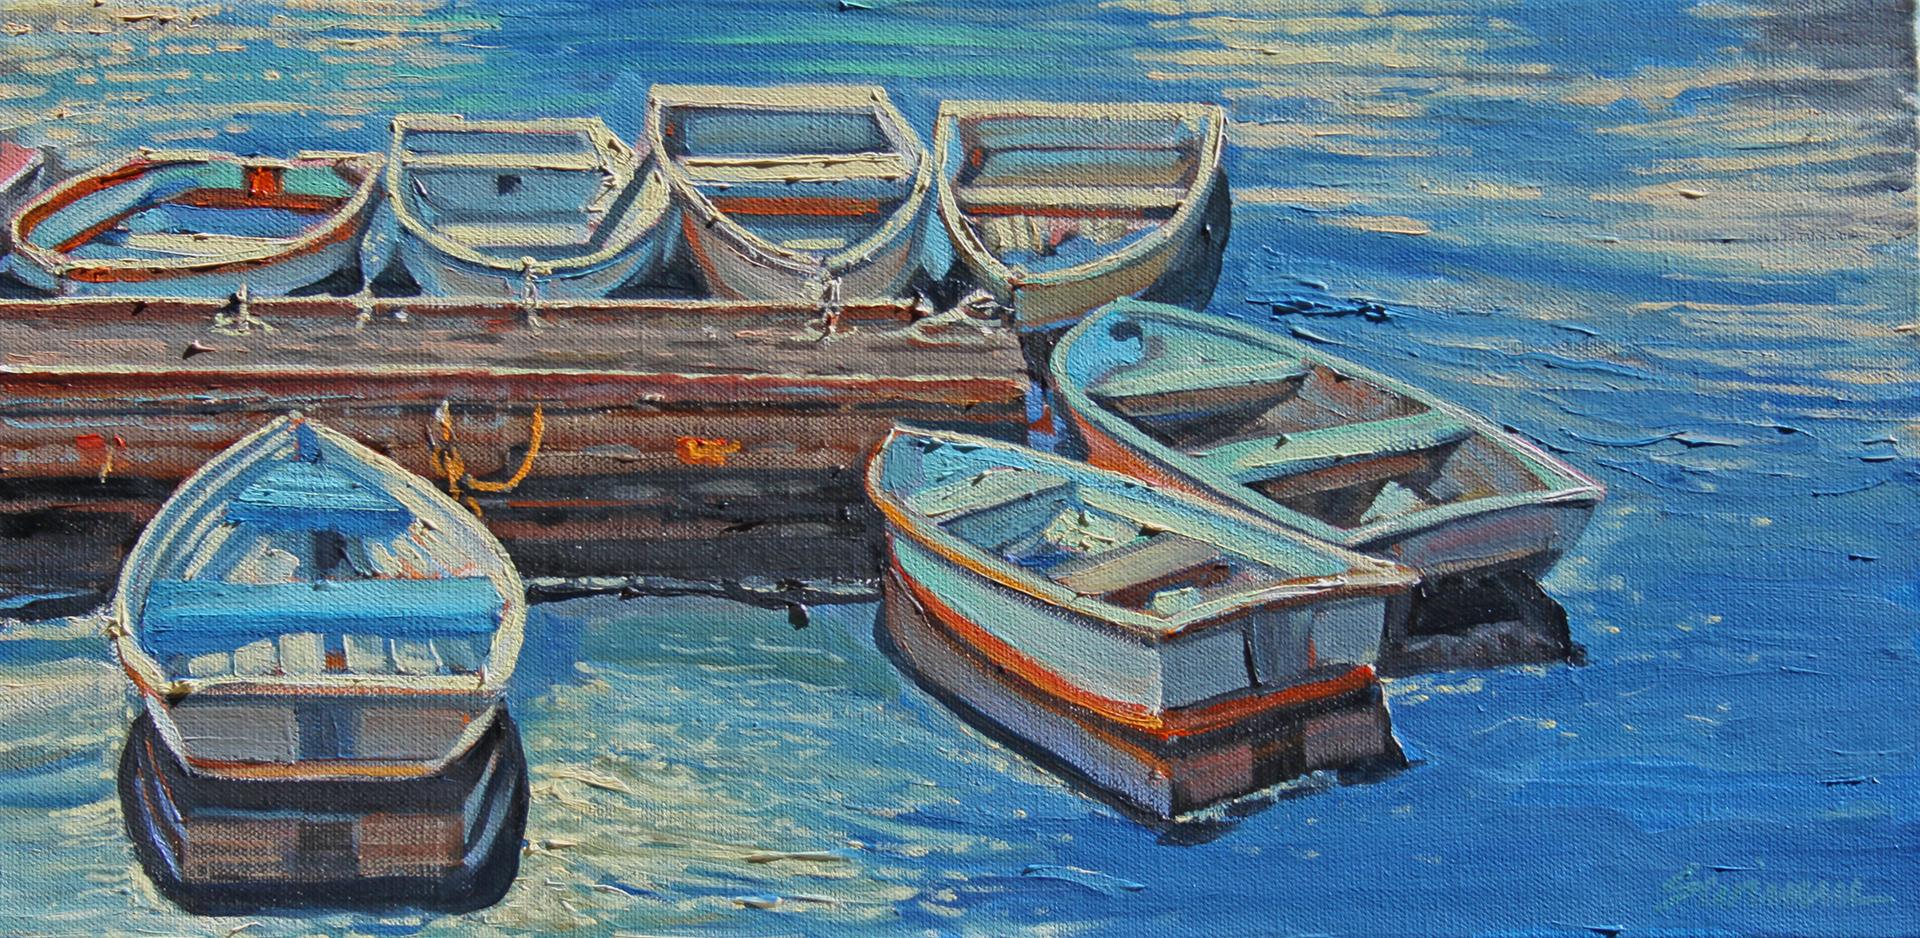 Tom Swimm Landscape Painting -  "Perkins Cove" Wooden Boats Tied Up With Glowing Water Reflections